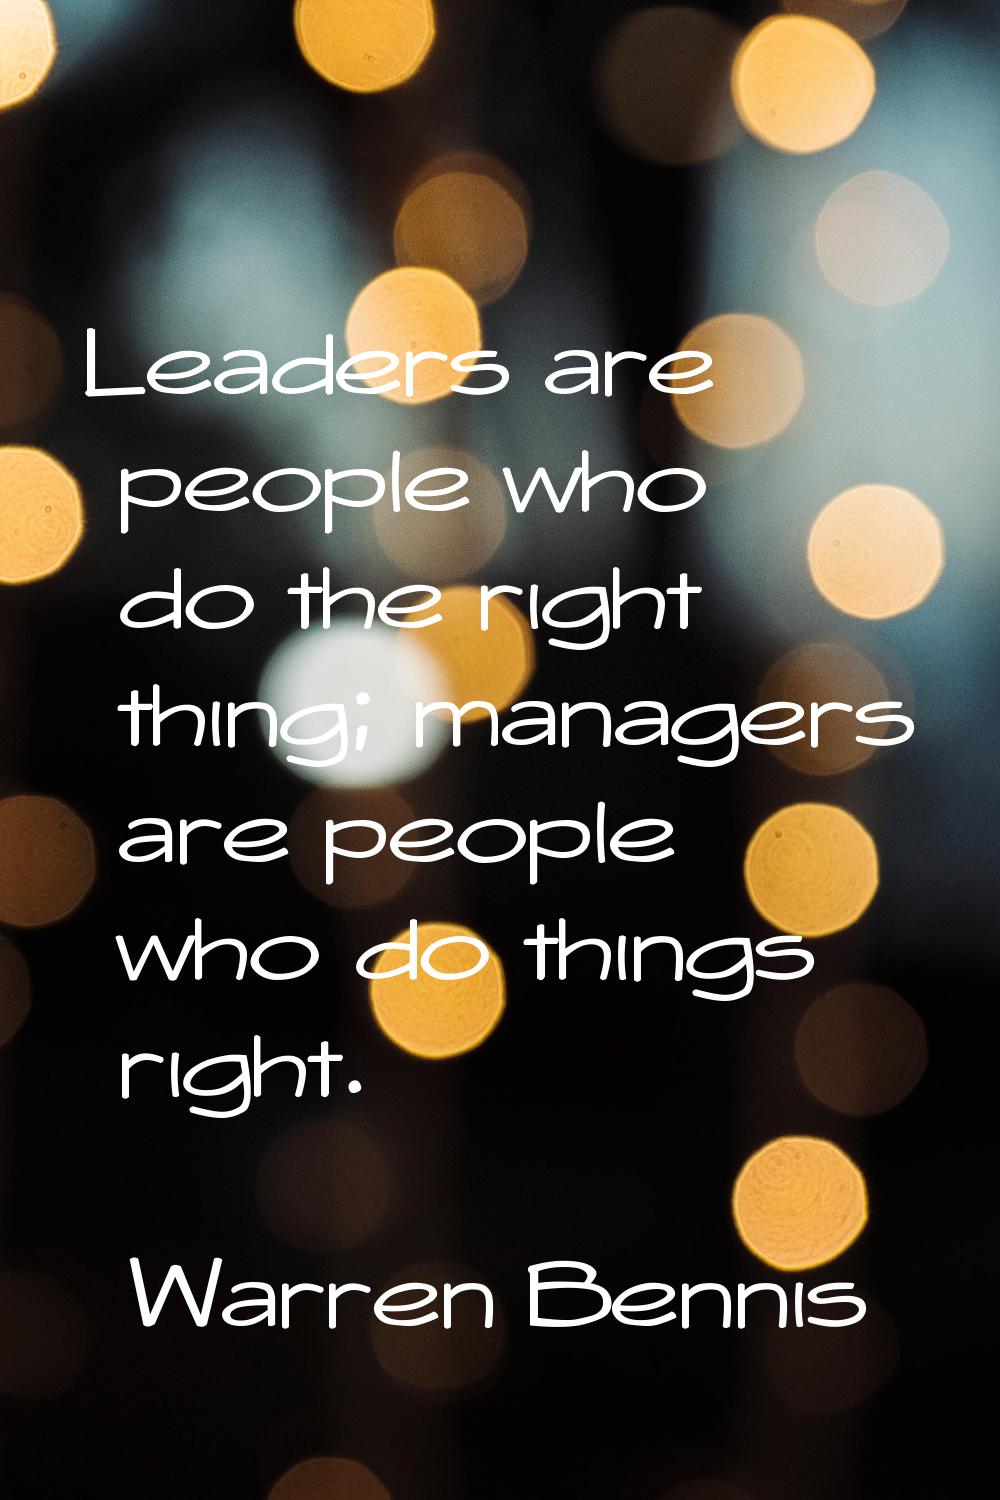 Leaders are people who do the right thing; managers are people who do things right.